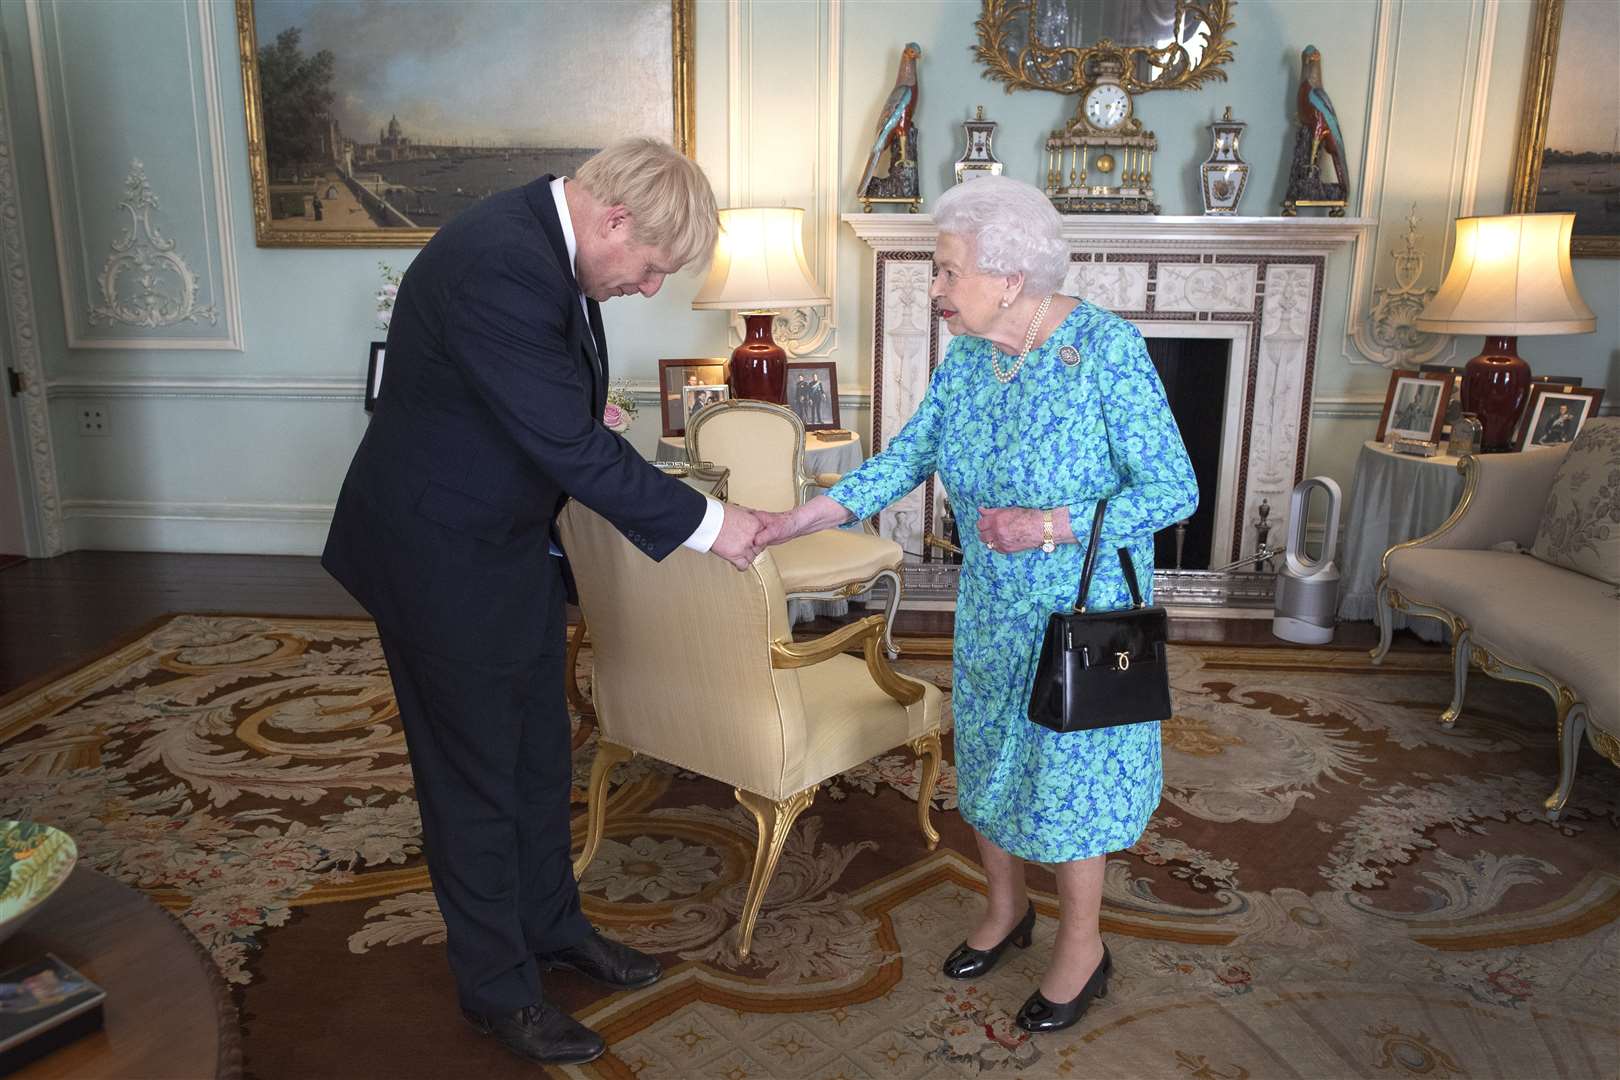 The Queen welcomes Boris Johnson during an audience in Buckingham Palace (Victoria Jones/PA)